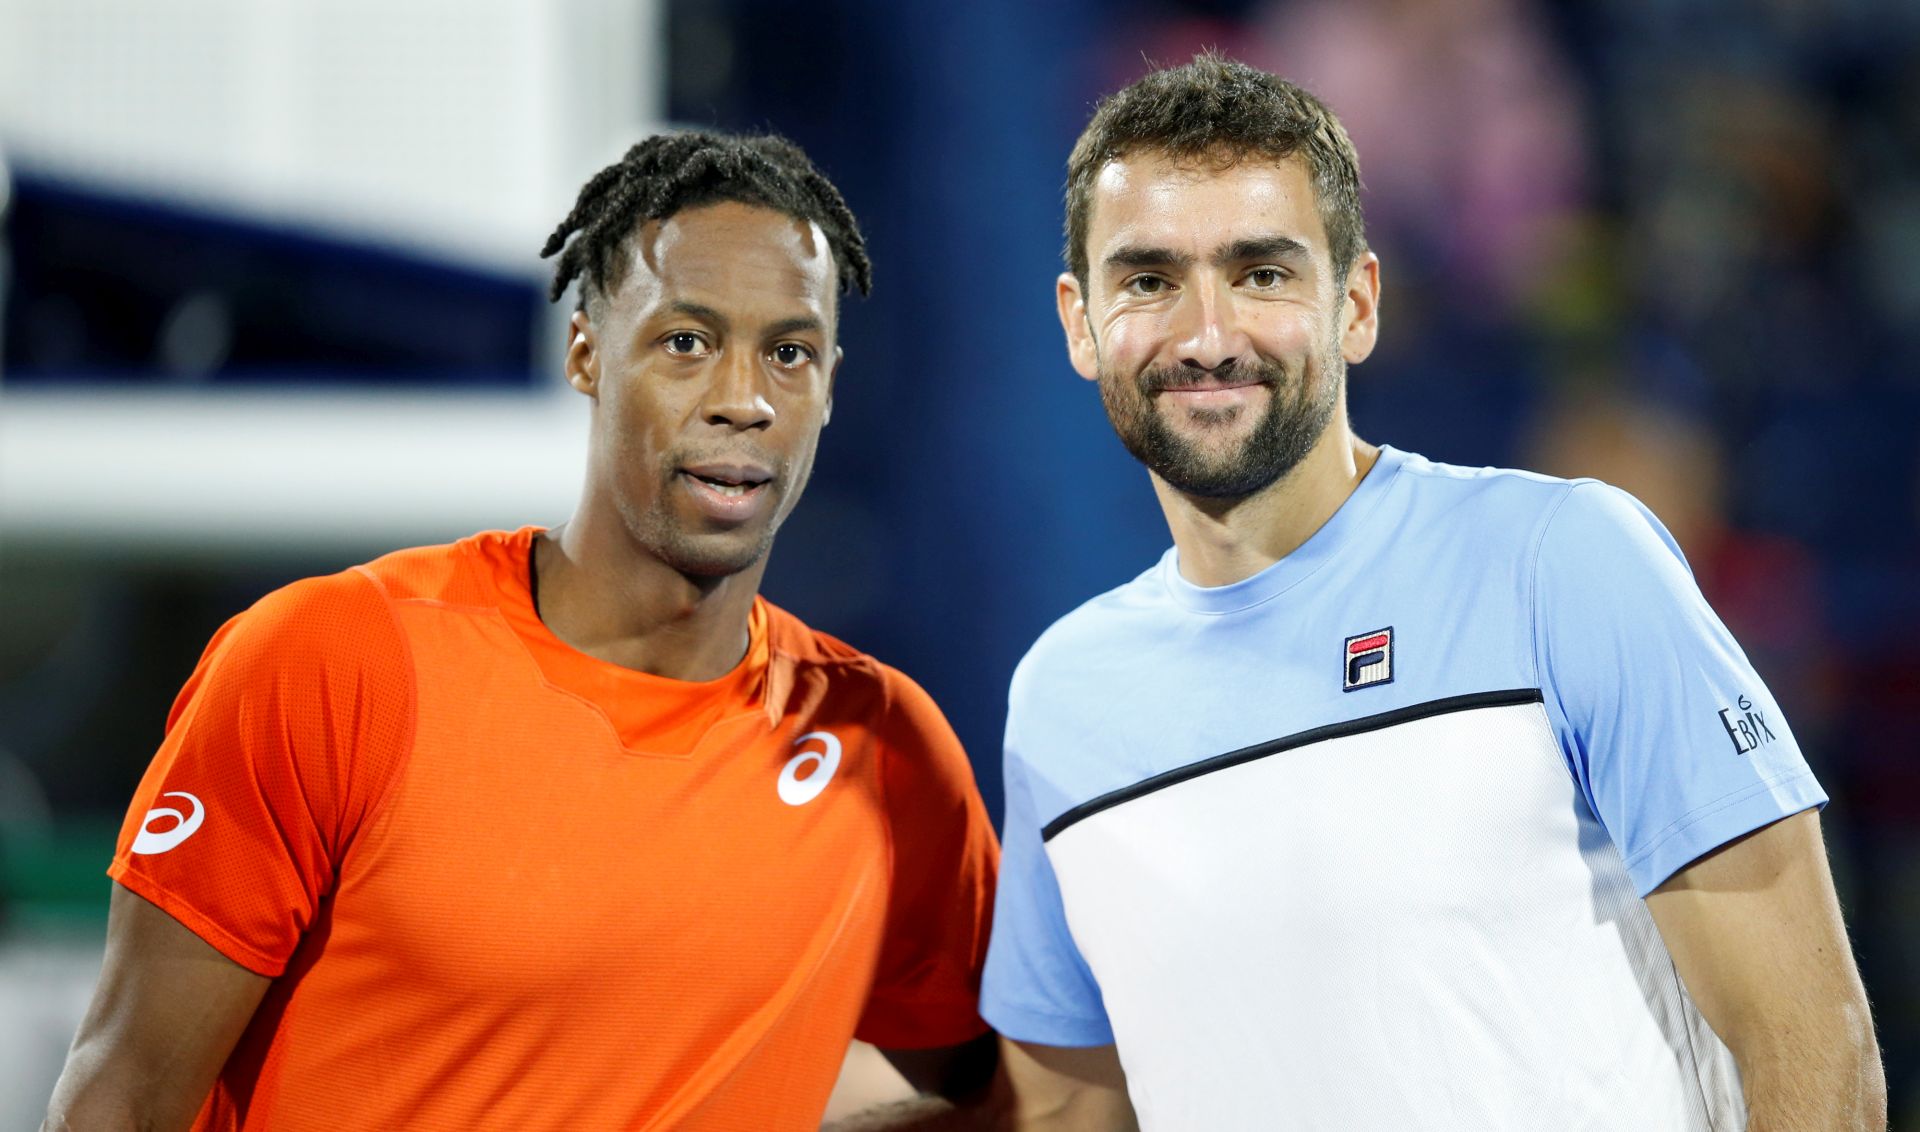 epa07399285 Marin Cilic (R) of Croatia poses before his first round match with Gael Monfils (L) of France at the Dubai Duty Free Tennis ATP Championships 2019 in Dubai, United Arab Emirates, 26 February 2019.  EPA/ALI HAIDER